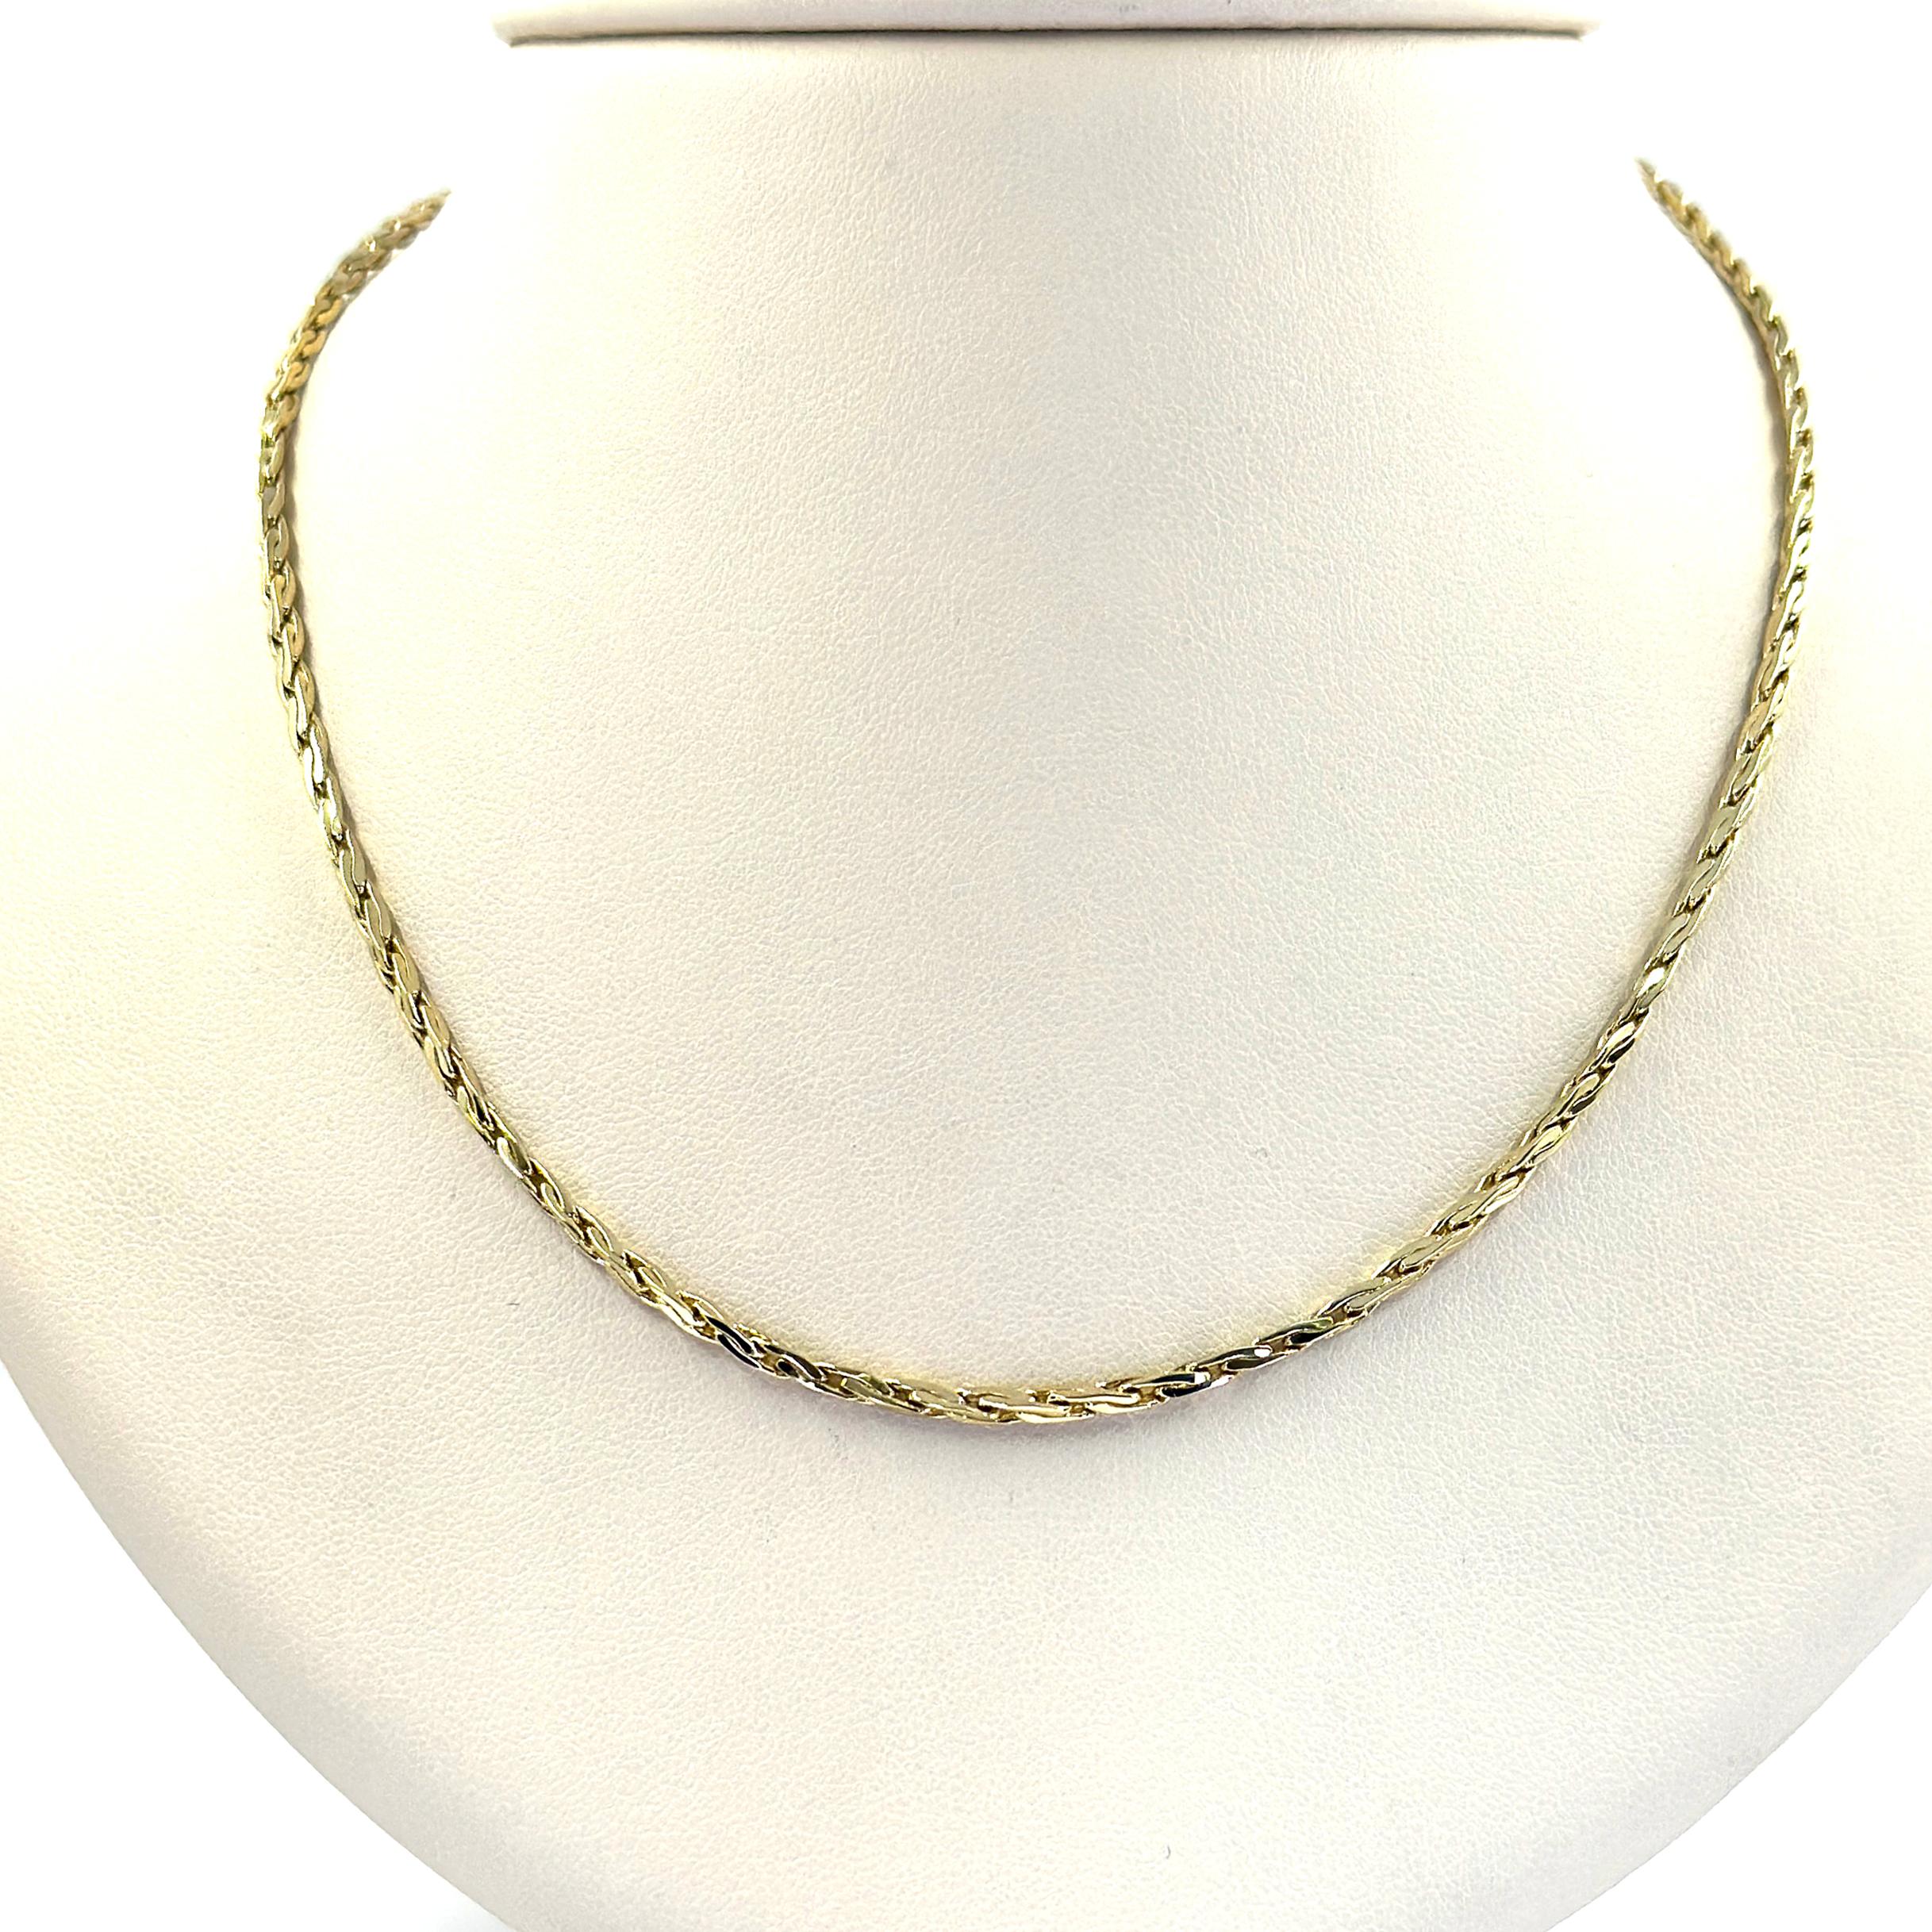 Gucci 18 Karat Yellow Gold Chain Measuring 1.75mm Wide and 18 Inches Long with Lobster Clasp. Finished Weight is 14.2 Grams.